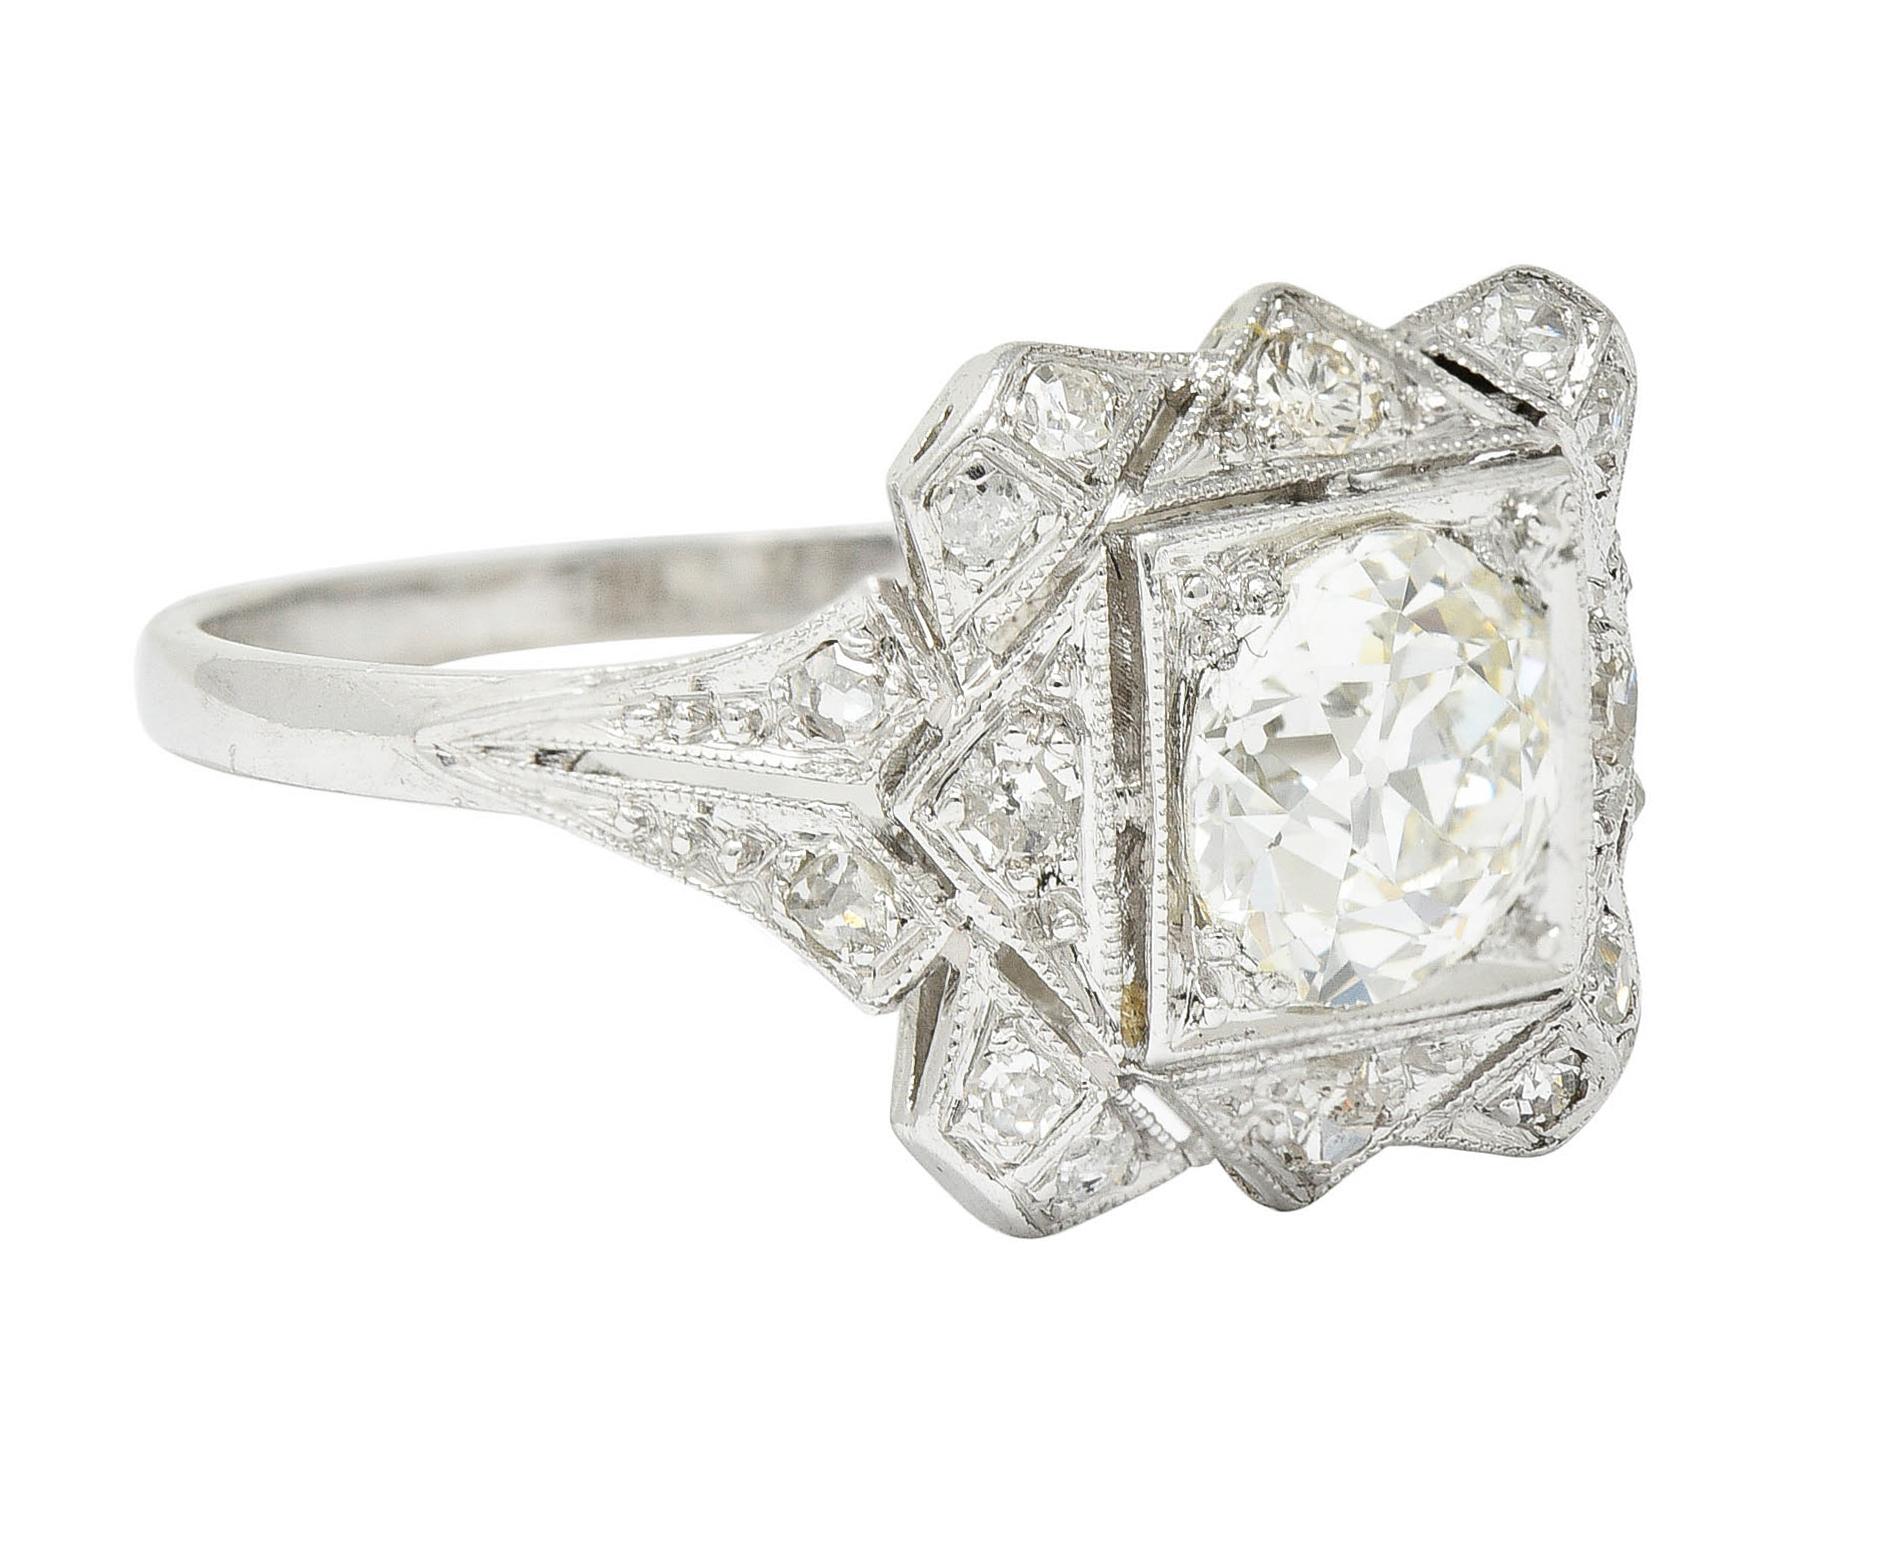 Centering an old European cut diamond weighing 1.02 carat - J color with VS1 clarity

Set low in a square form head and surrounded by a geometric halo

Accented by rose and single cut diamonds weighing in total approximately 0.38 carat - J/K color